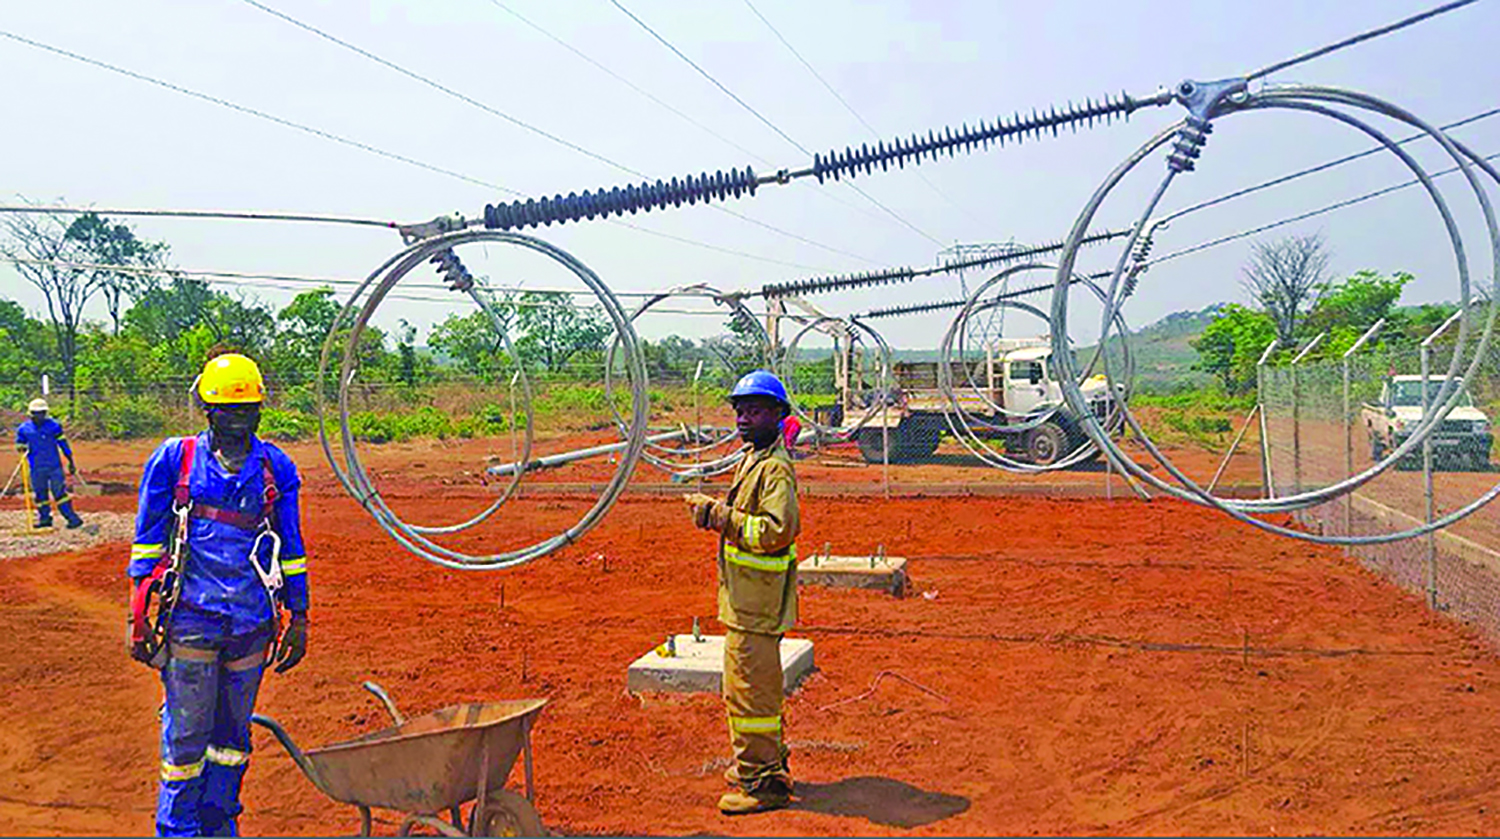 Workers install electrical transmission lines as part of Ivanhoe Mines’ program to connect its Kamoa copper project to the DRC’s national power grid. (Photo: Ivanhoe Mines)